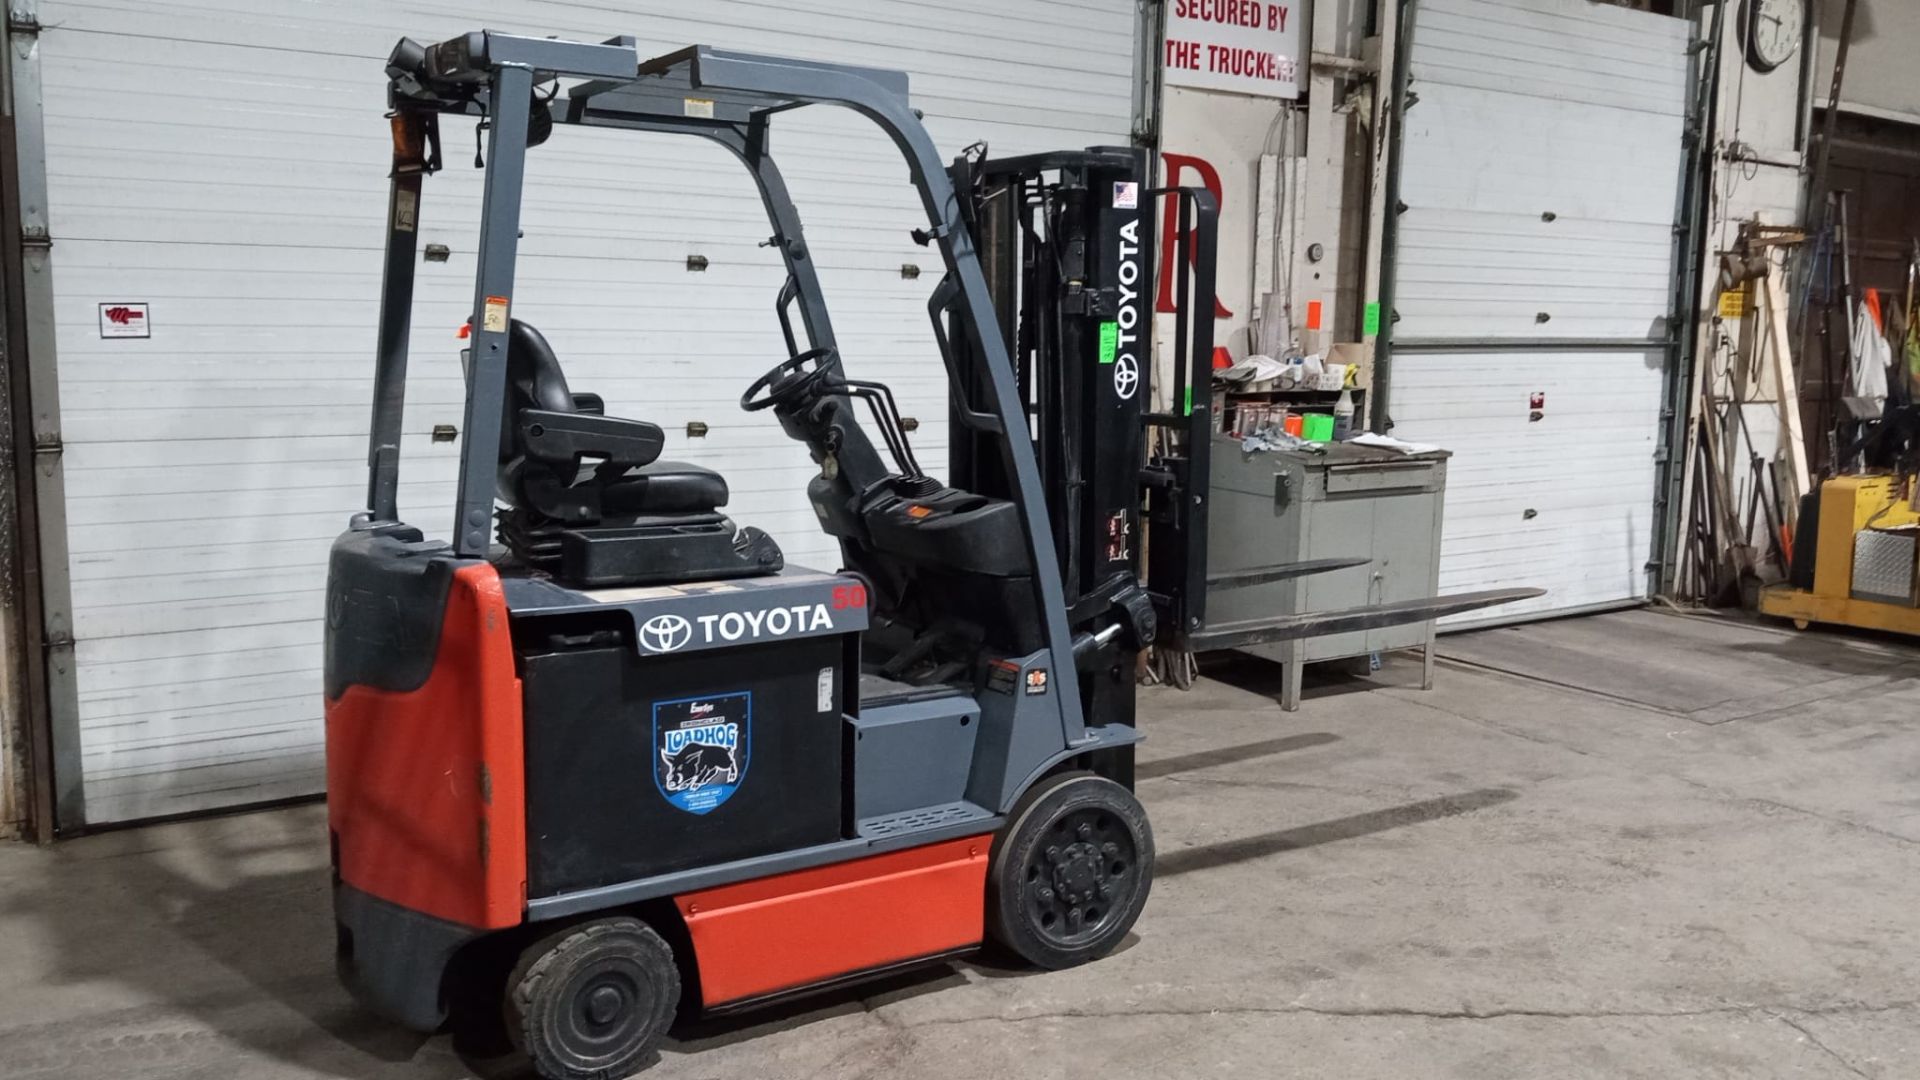 ***2017 TOYOTA 5,000lbs Capacity Electric Forklift 36V with sideshift and 60" forks - FREE CUSTOMS - Image 2 of 6